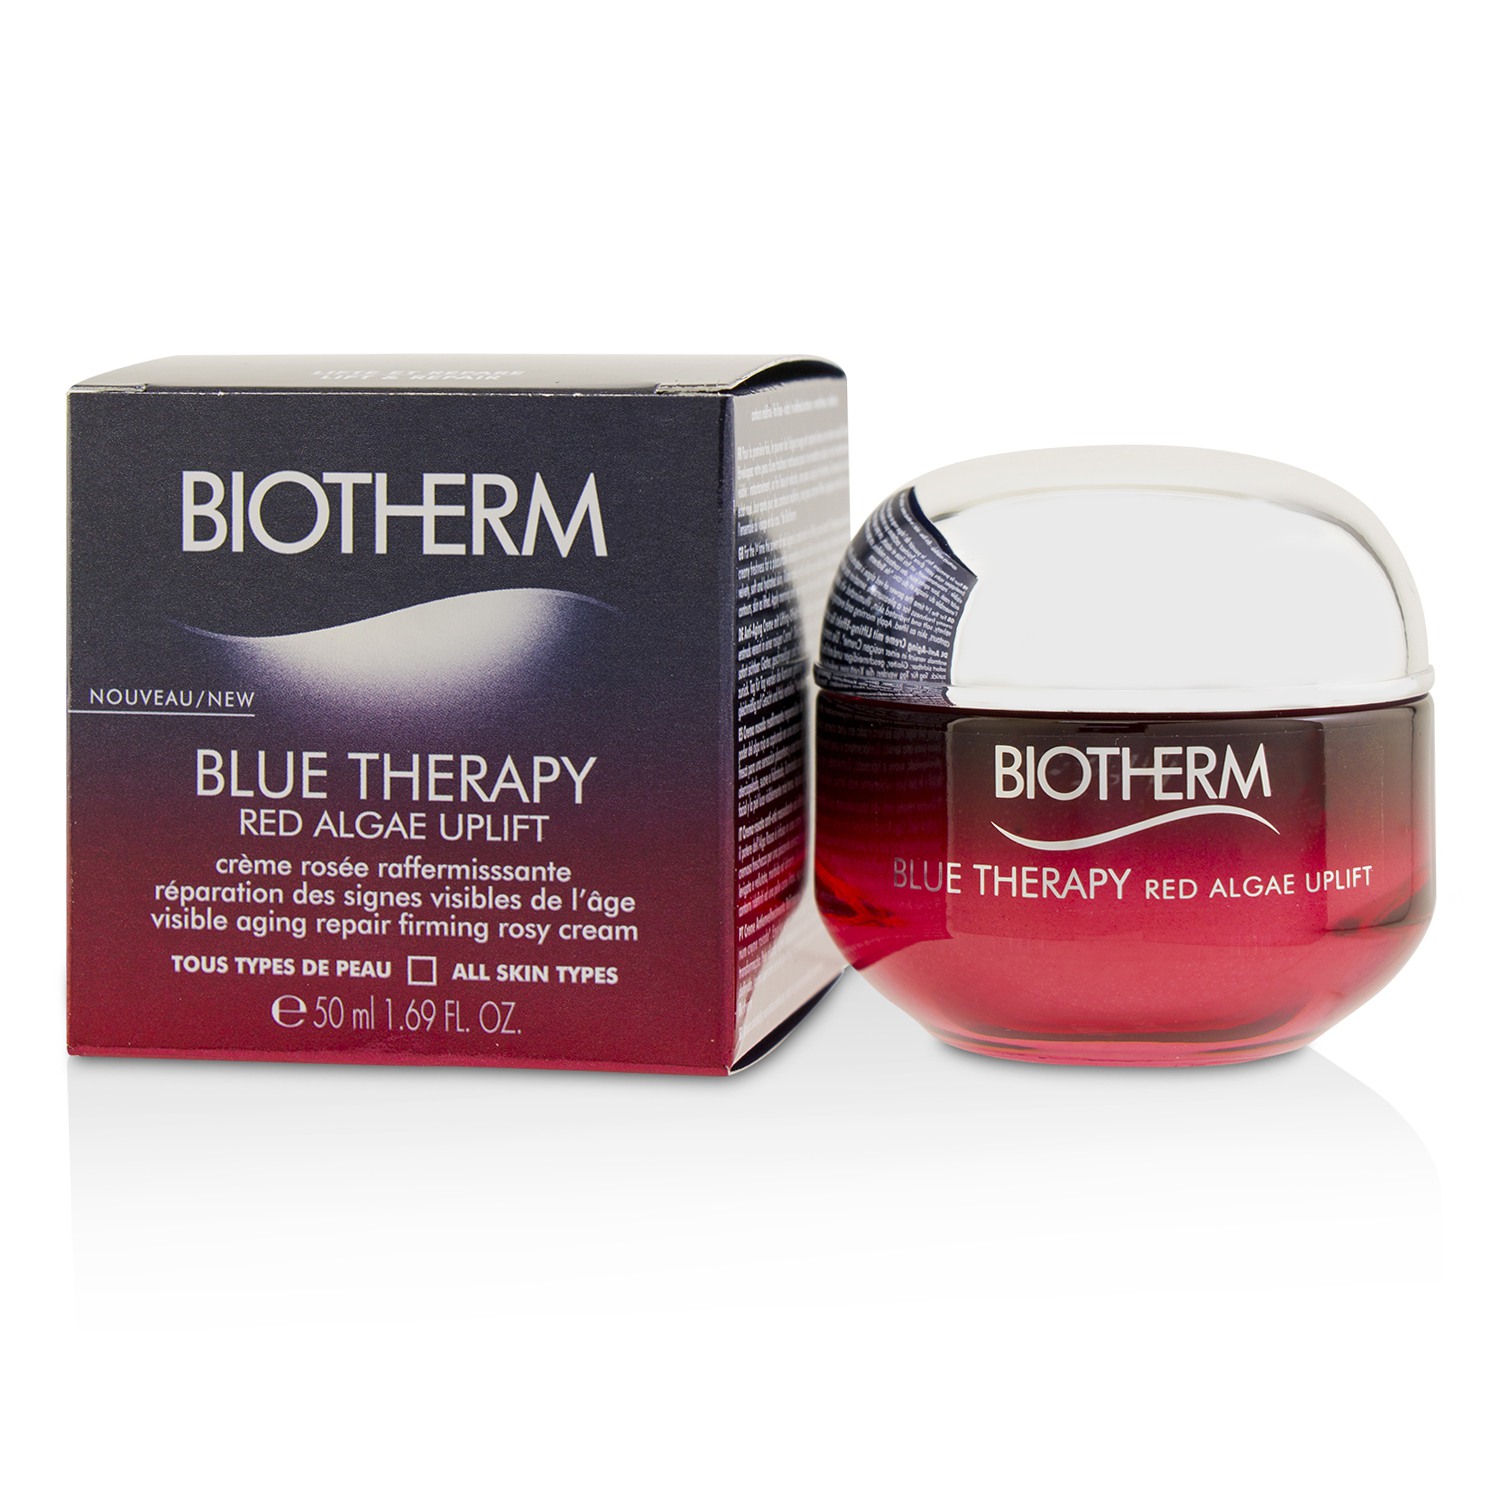 Blue Therapy Red Algae Uplift Visible Aging Repair Firming Rosy Cream - All Skin Types Biotherm Image